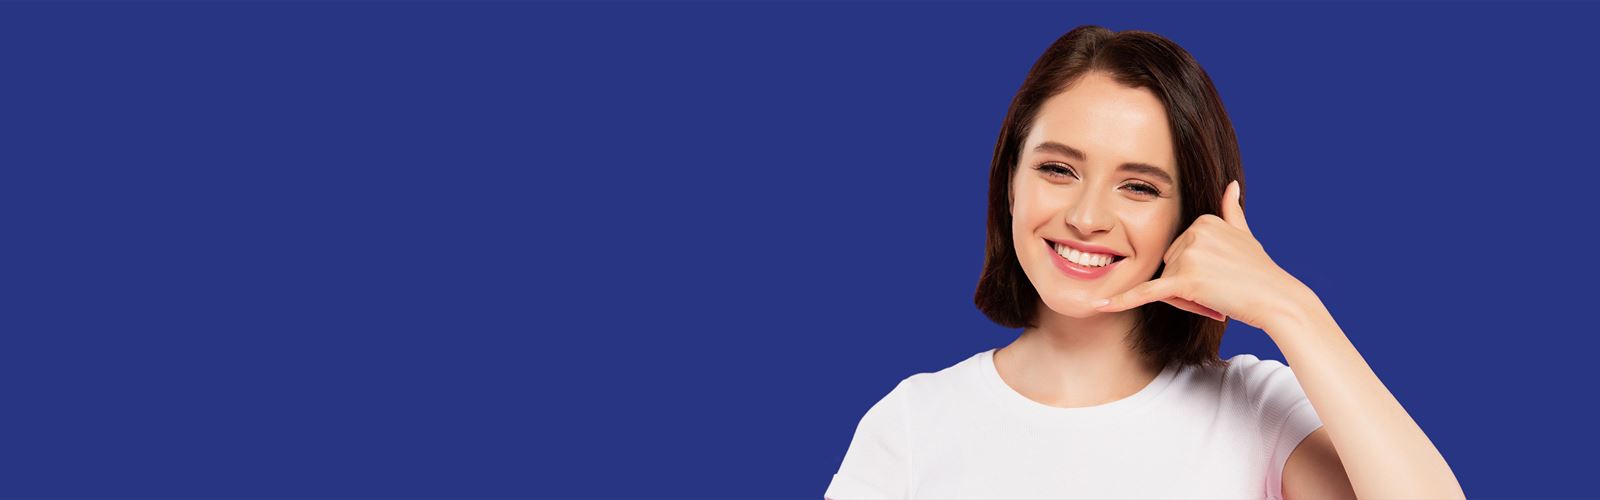 Smiling woman with calling gesture and blue background